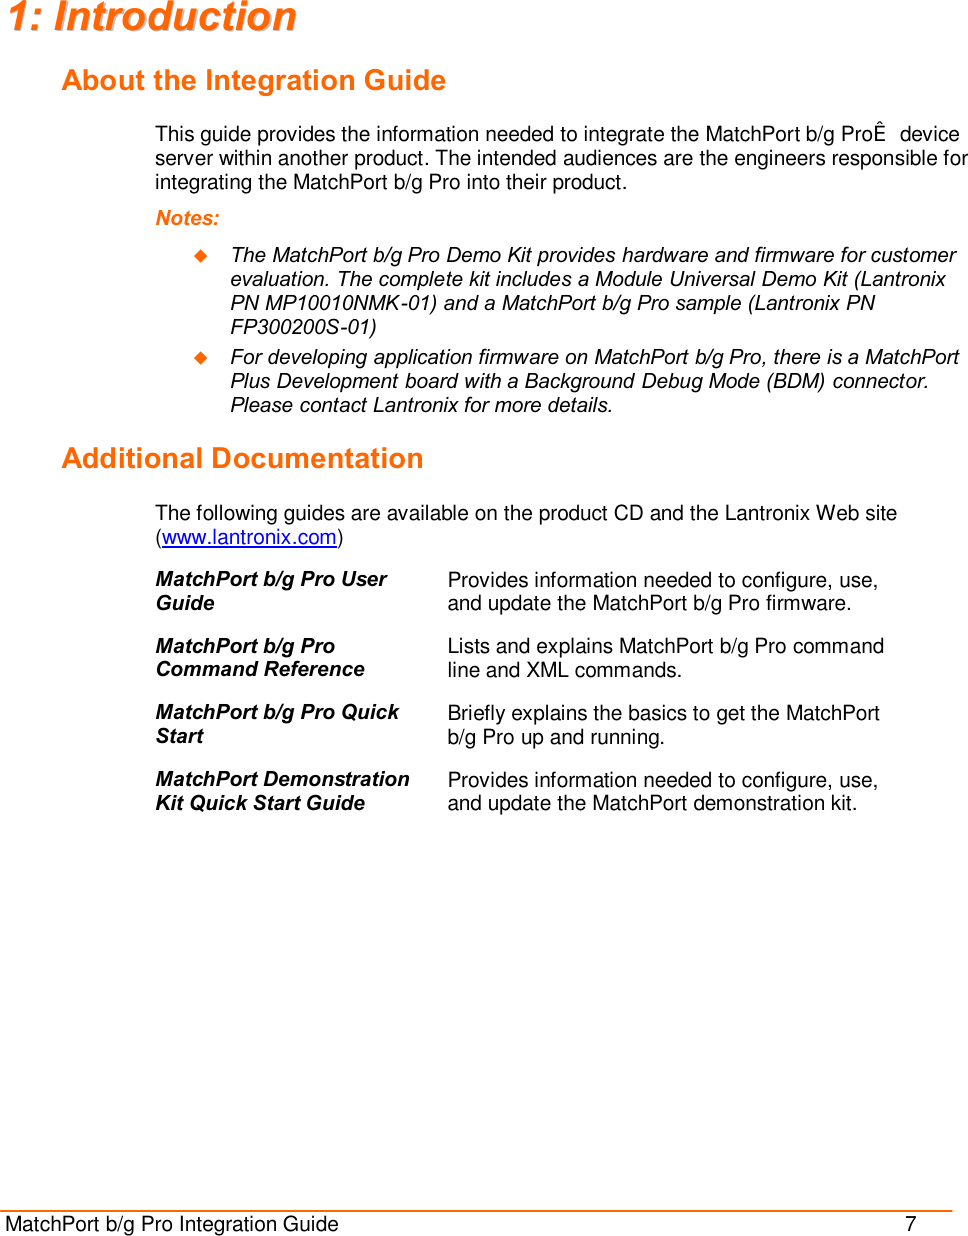  MatchPort b/g Pro Integration Guide                                          7  11::  IInnttrroodduuccttiioonn  About the Integration Guide This guide provides the information needed to integrate the MatchPort b/g Pro™ device server within another product. The intended audiences are the engineers responsible for integrating the MatchPort b/g Pro into their product. Notes:  u The MatchPort b/g Pro Demo Kit provides hardware and firmware for customer evaluation. The complete kit includes a Module Universal Demo Kit (Lantronix PN MP10010NMK-01) and a MatchPort b/g Pro sample (Lantronix PN FP300200S-01) u For developing application firmware on MatchPort b/g Pro, there is a MatchPort Plus Development board with a Background Debug Mode (BDM) connector. Please contact Lantronix for more details. Additional Documentation The following guides are available on the product CD and the Lantronix Web site (www.lantronix.com) MatchPort b/g Pro User Guide Provides information needed to configure, use, and update the MatchPort b/g Pro firmware. MatchPort b/g Pro Command Reference Lists and explains MatchPort b/g Pro command line and XML commands. MatchPort b/g Pro Quick Start Briefly explains the basics to get the MatchPort b/g Pro up and running. MatchPort Demonstration Kit Quick Start Guide Provides information needed to configure, use, and update the MatchPort demonstration kit. 